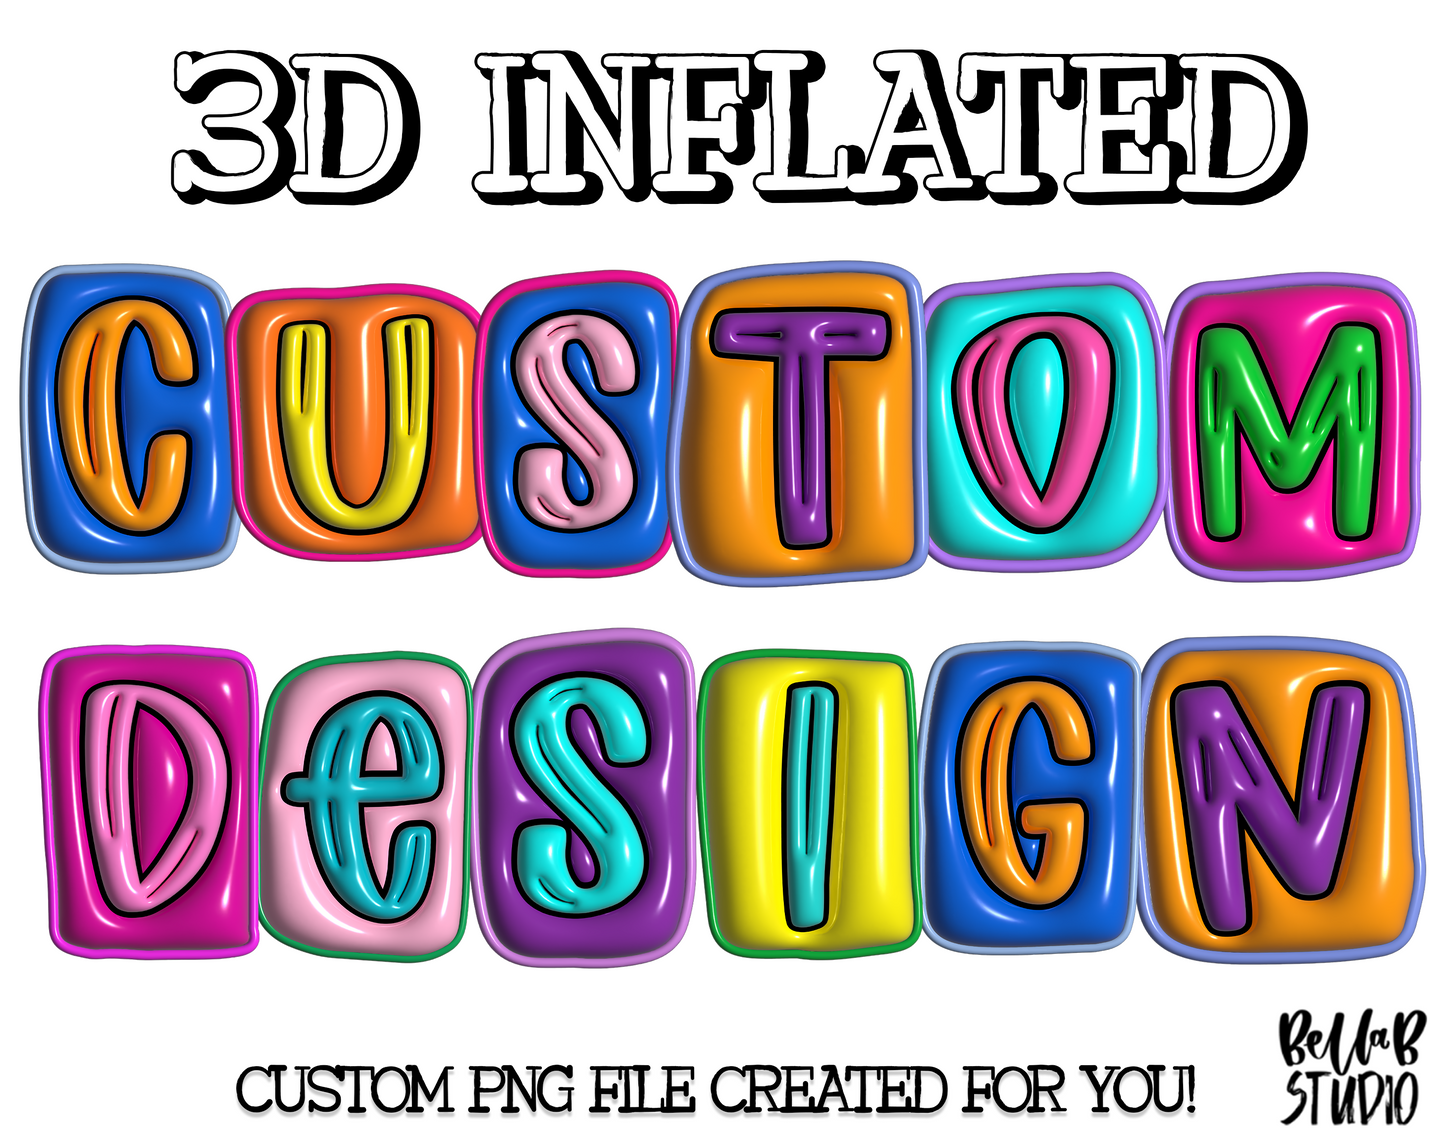 Custom 3D Inflated PNG Design